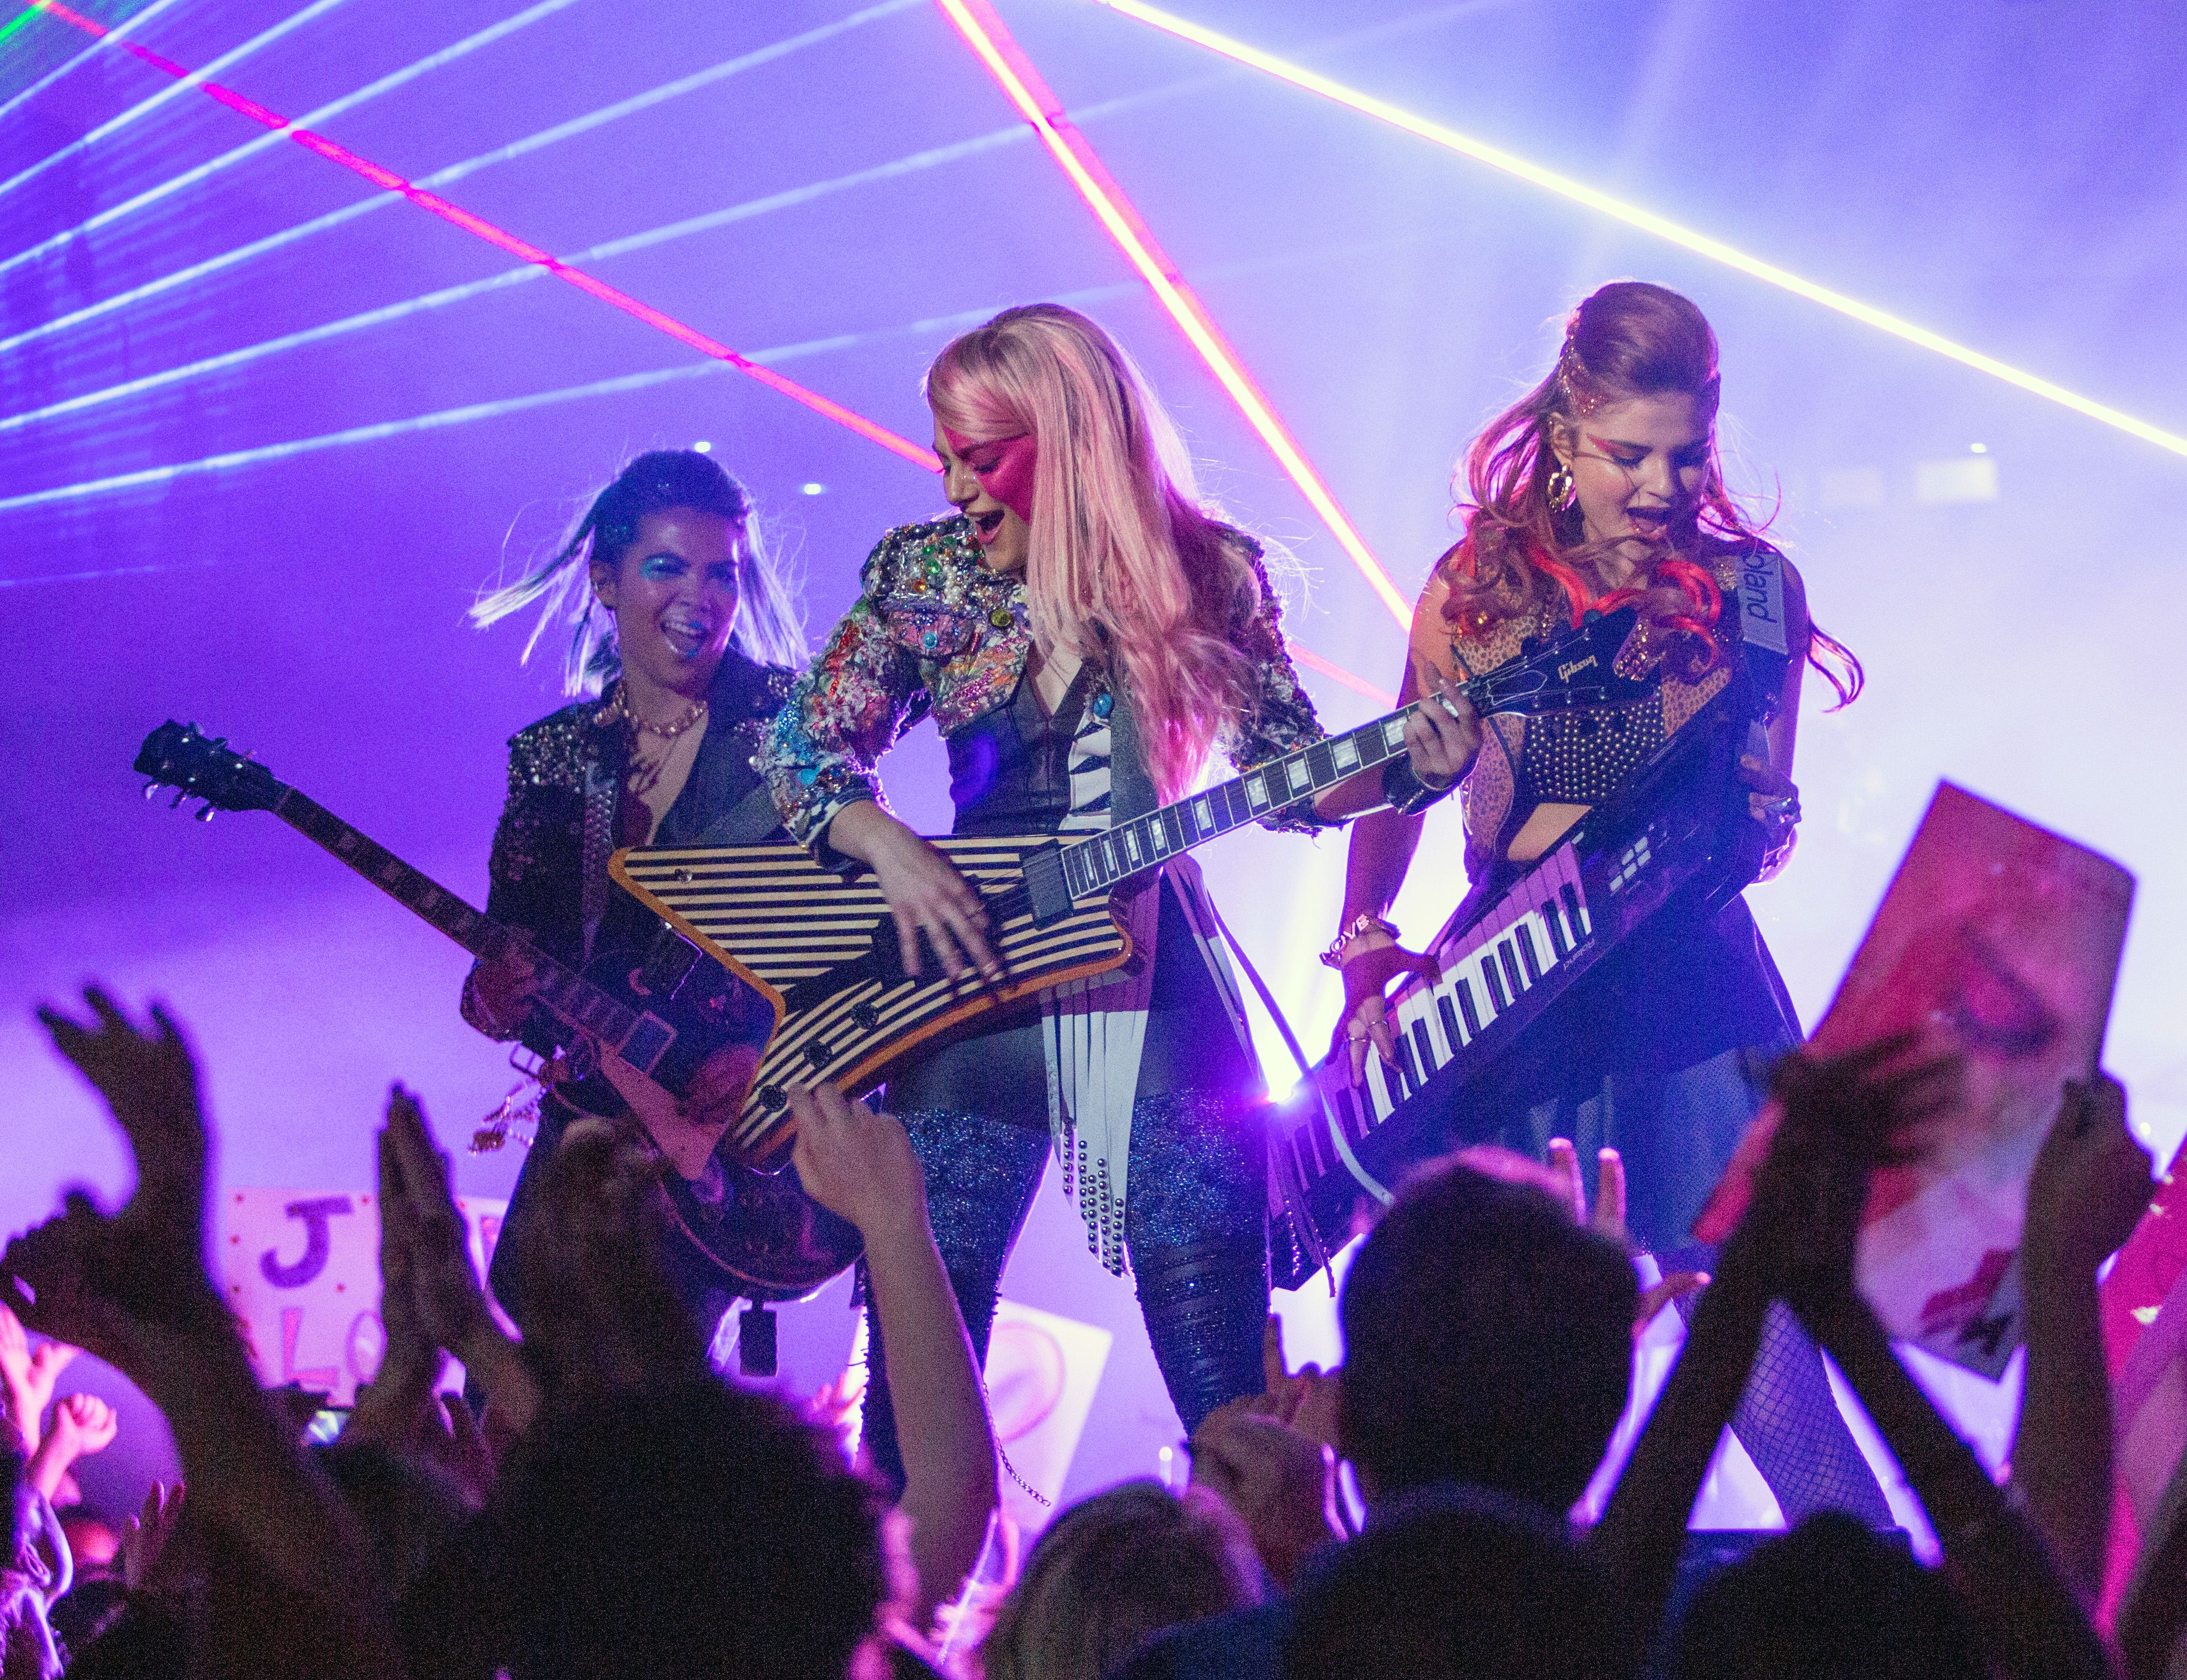 Jem and the Holograms Photo